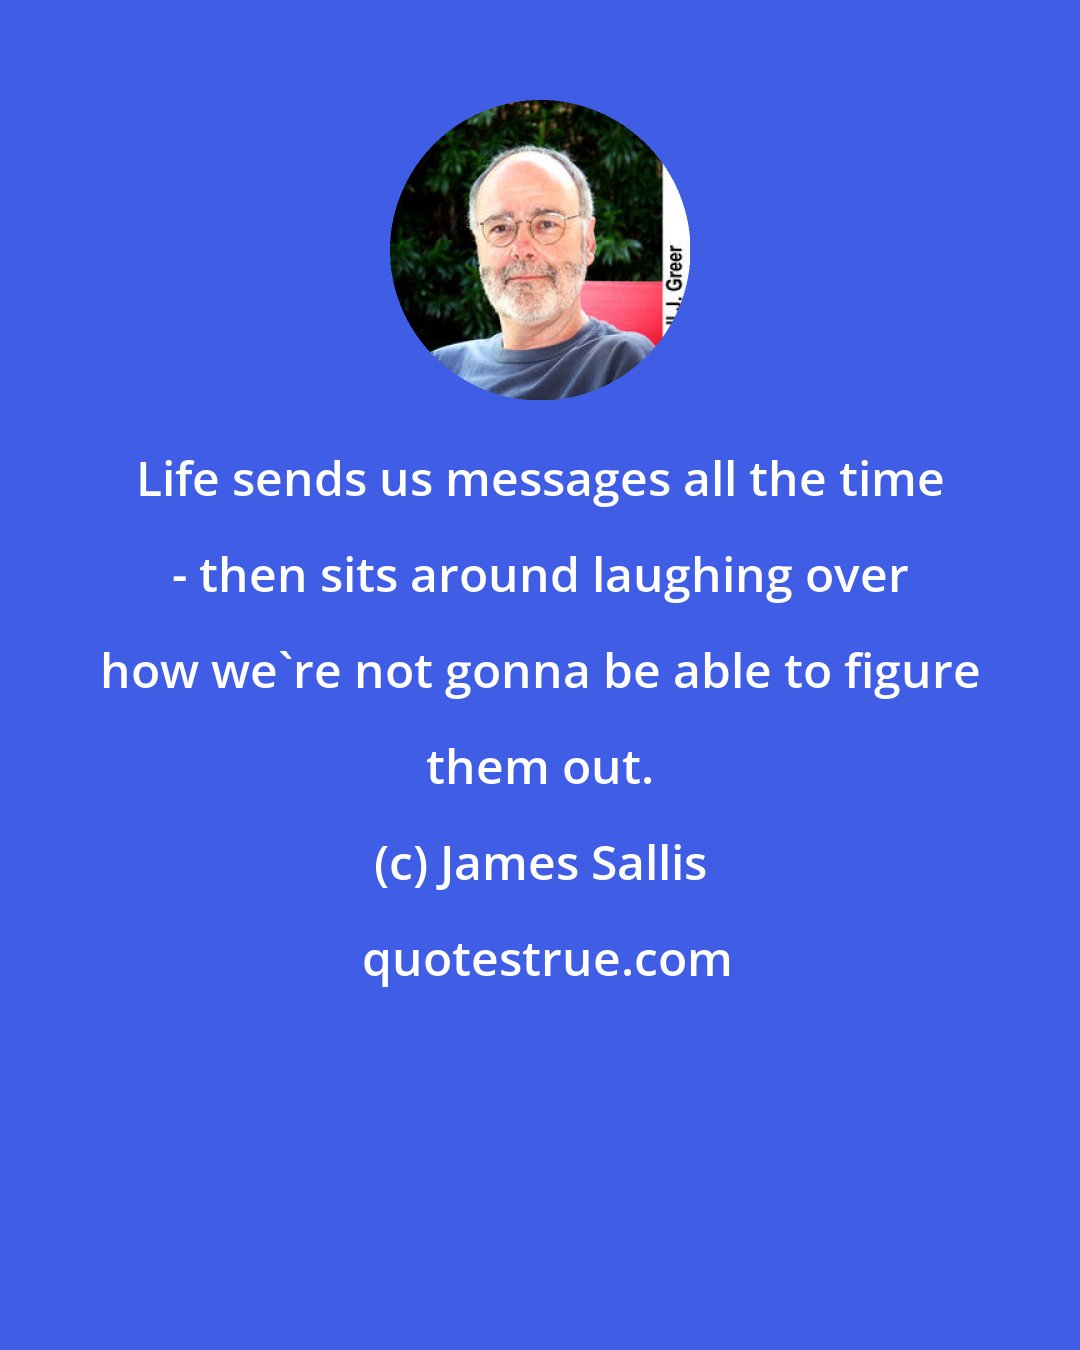 James Sallis: Life sends us messages all the time - then sits around laughing over how we're not gonna be able to figure them out.